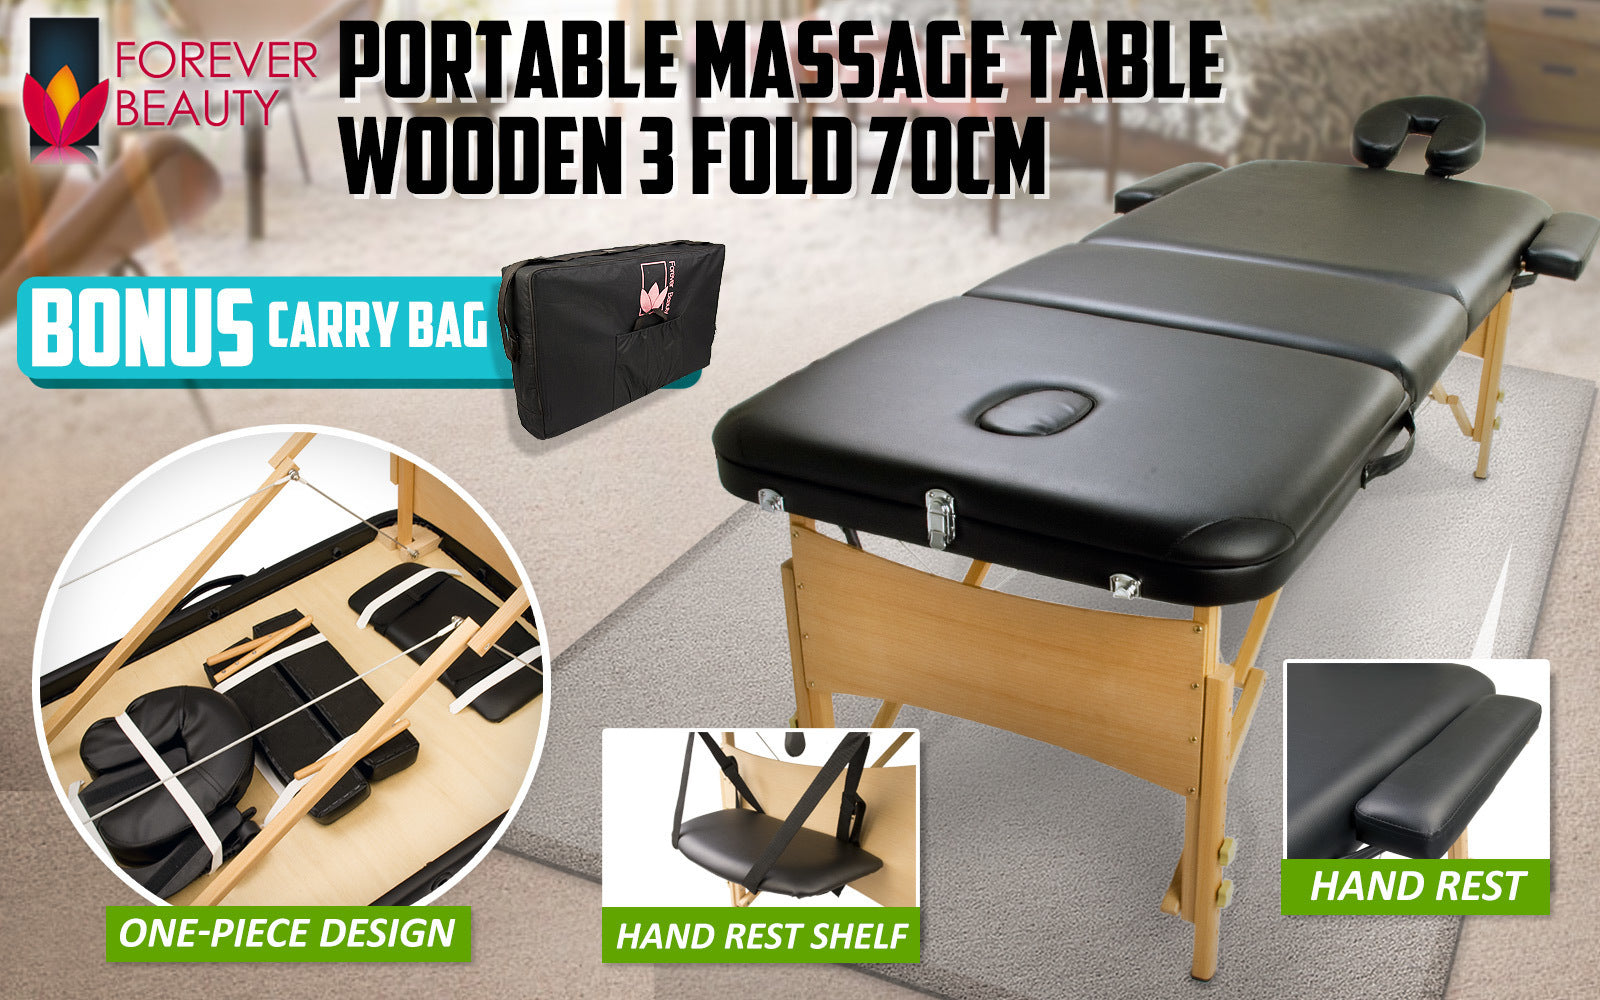 forever-beauty-black-portable-massage-table-bed-therapy-waxing-3-fold-70cm-wooden